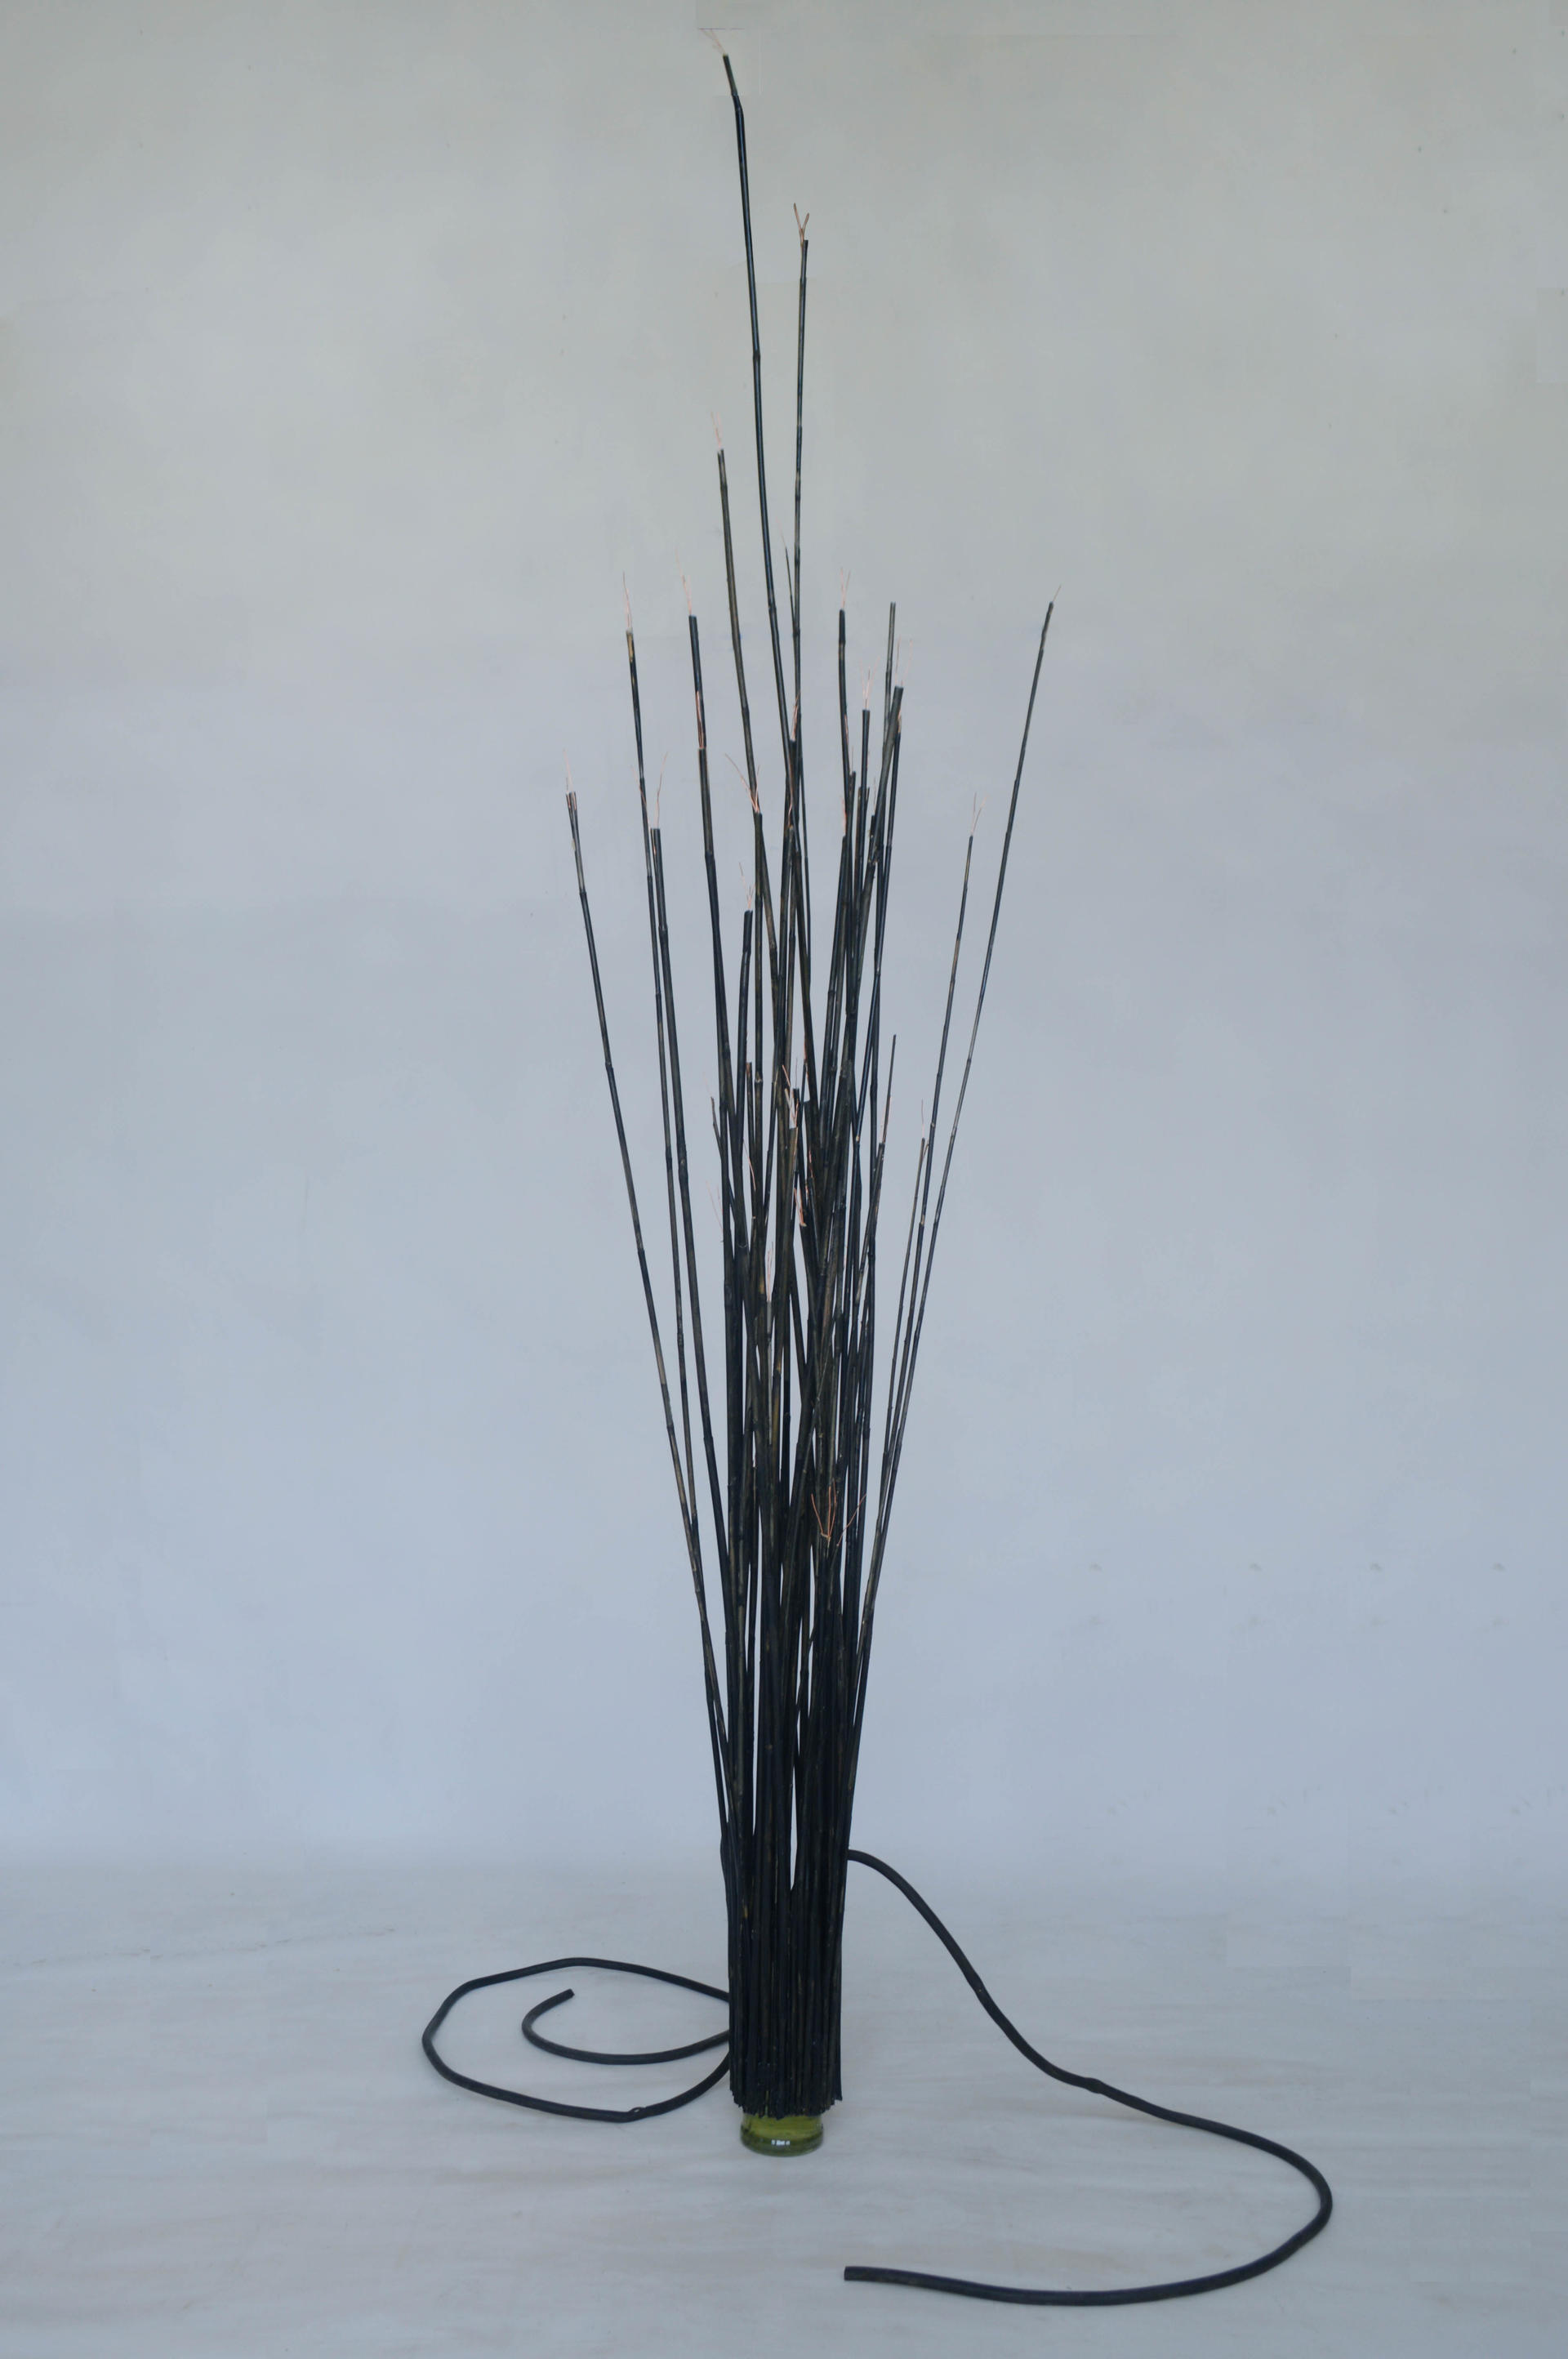 2023. Glass bottle, olive oil, bamboo, copper wire, cable.